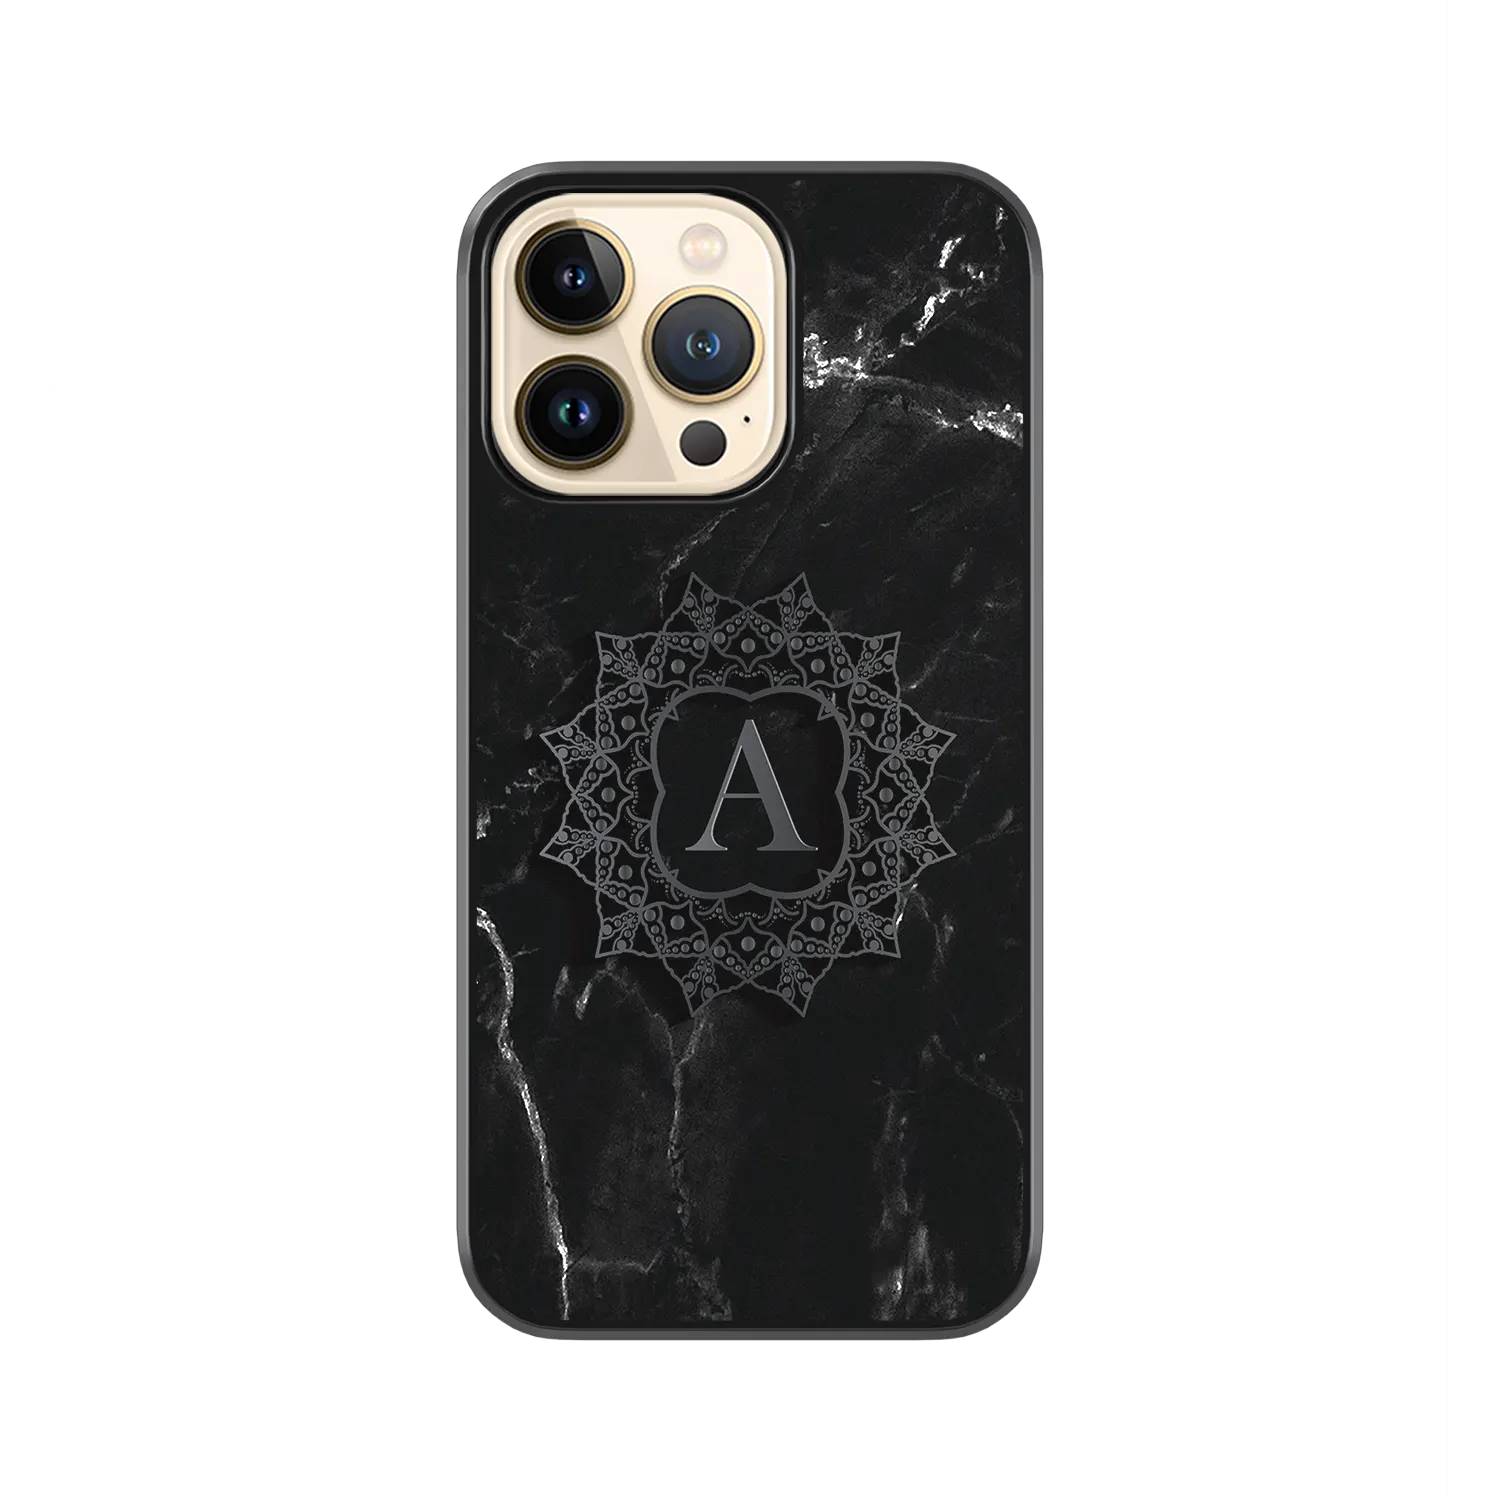 Achlys iphone 11 pro max cover